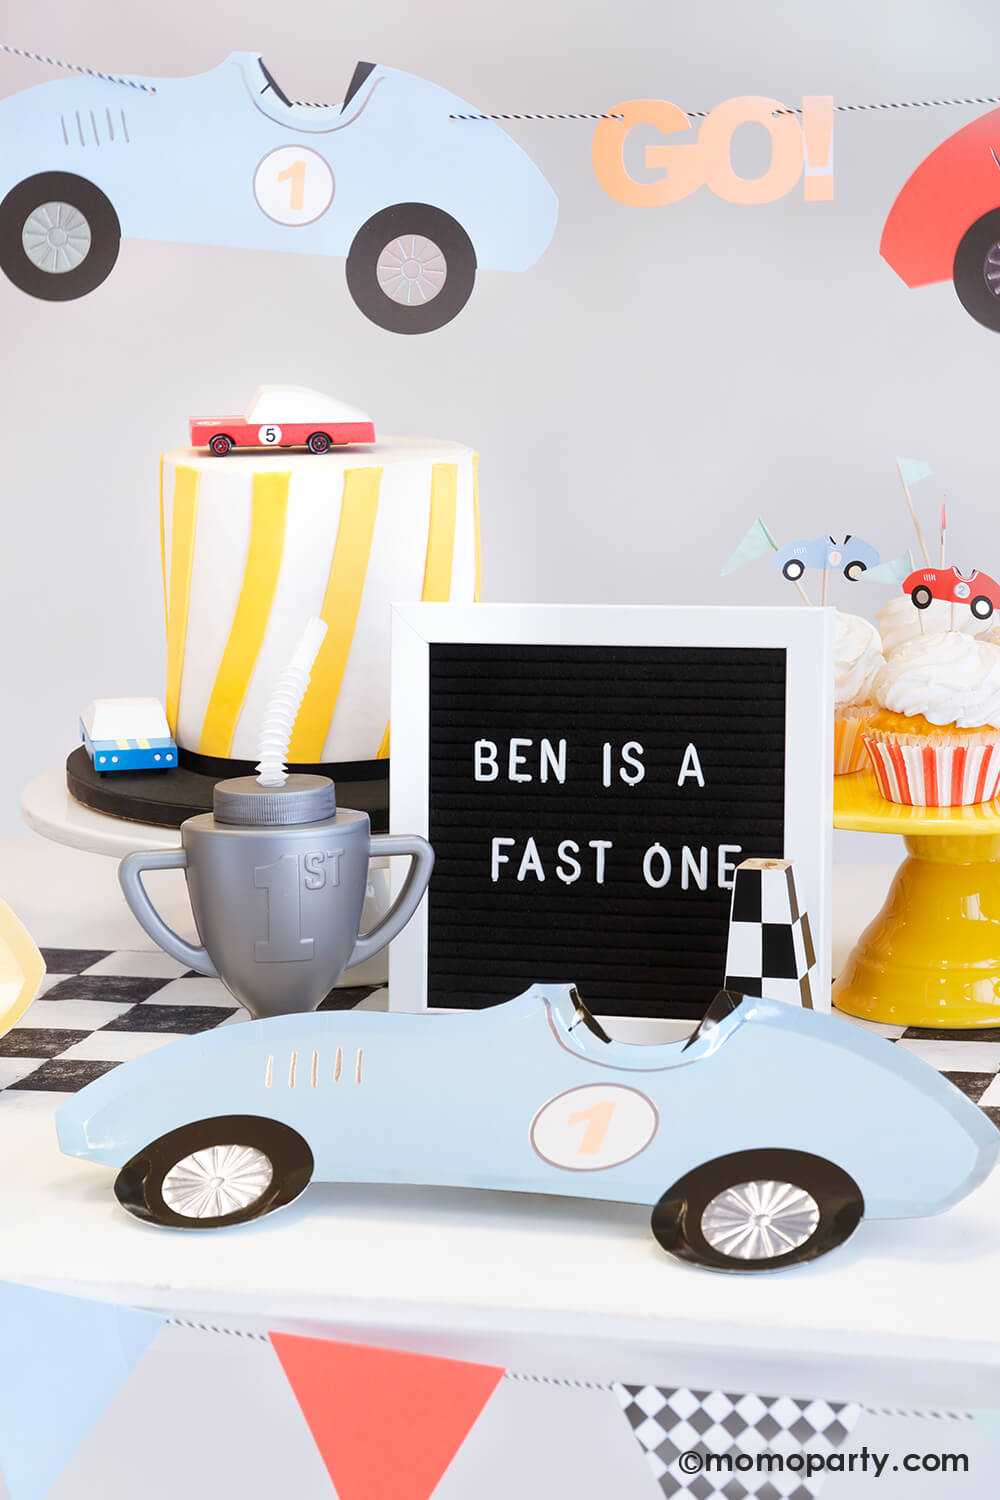 A "Fast One" race car themed first birthday party table featuring Momo Party's race car shaped paper plates, a trophy shaped sipper on a checkered paper table runner, along with a modern cake adorned with wooden toy race cars and some cupcakes decorated with Meri Meri's race car toppers. Above the table hung a vintage race car party garland in soft pastel colors. Along with a letter board spelling "Ben is a fast one" , it makes a perfect inspiration for a baby boy's first birthday celebration.